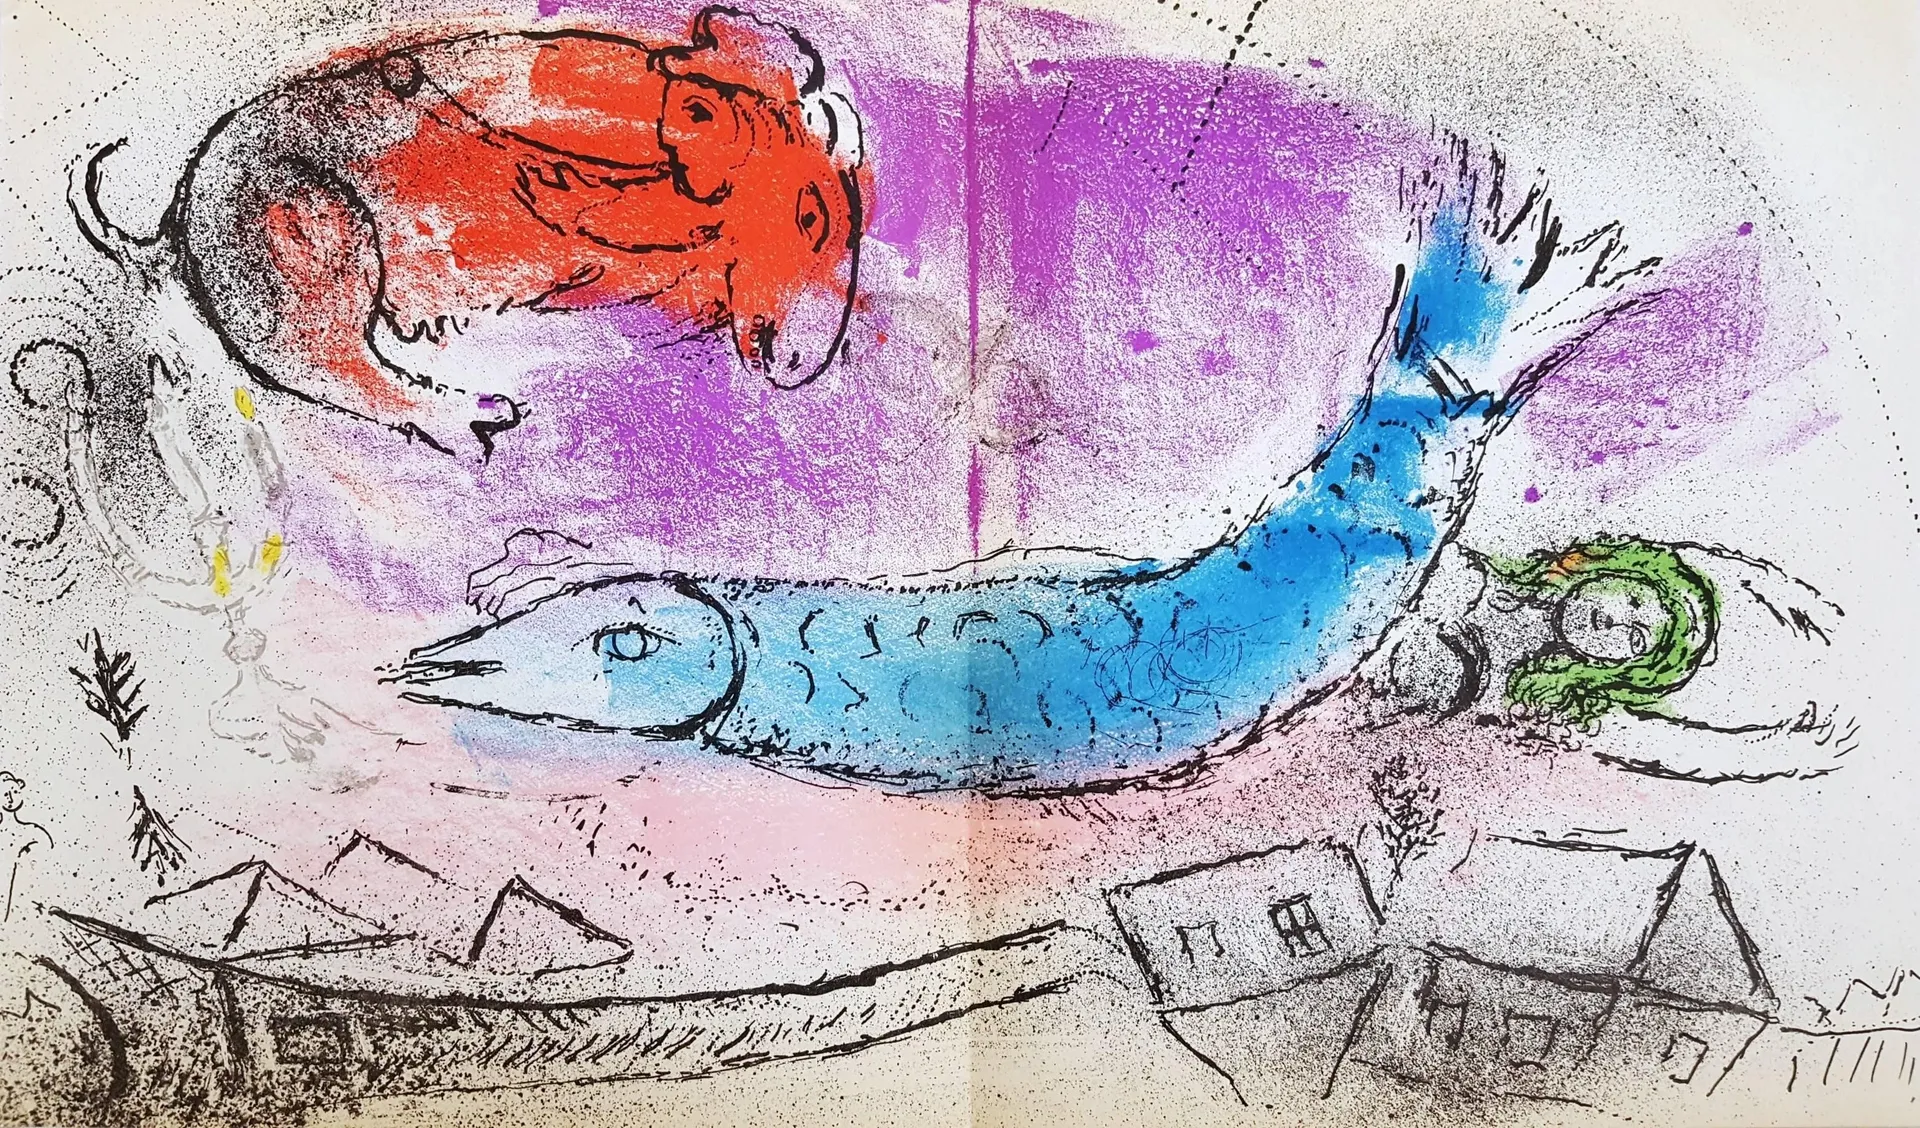 The Blue Fish /// Modern Art Marc Chagall Lithograph Figurative Colorful Woman